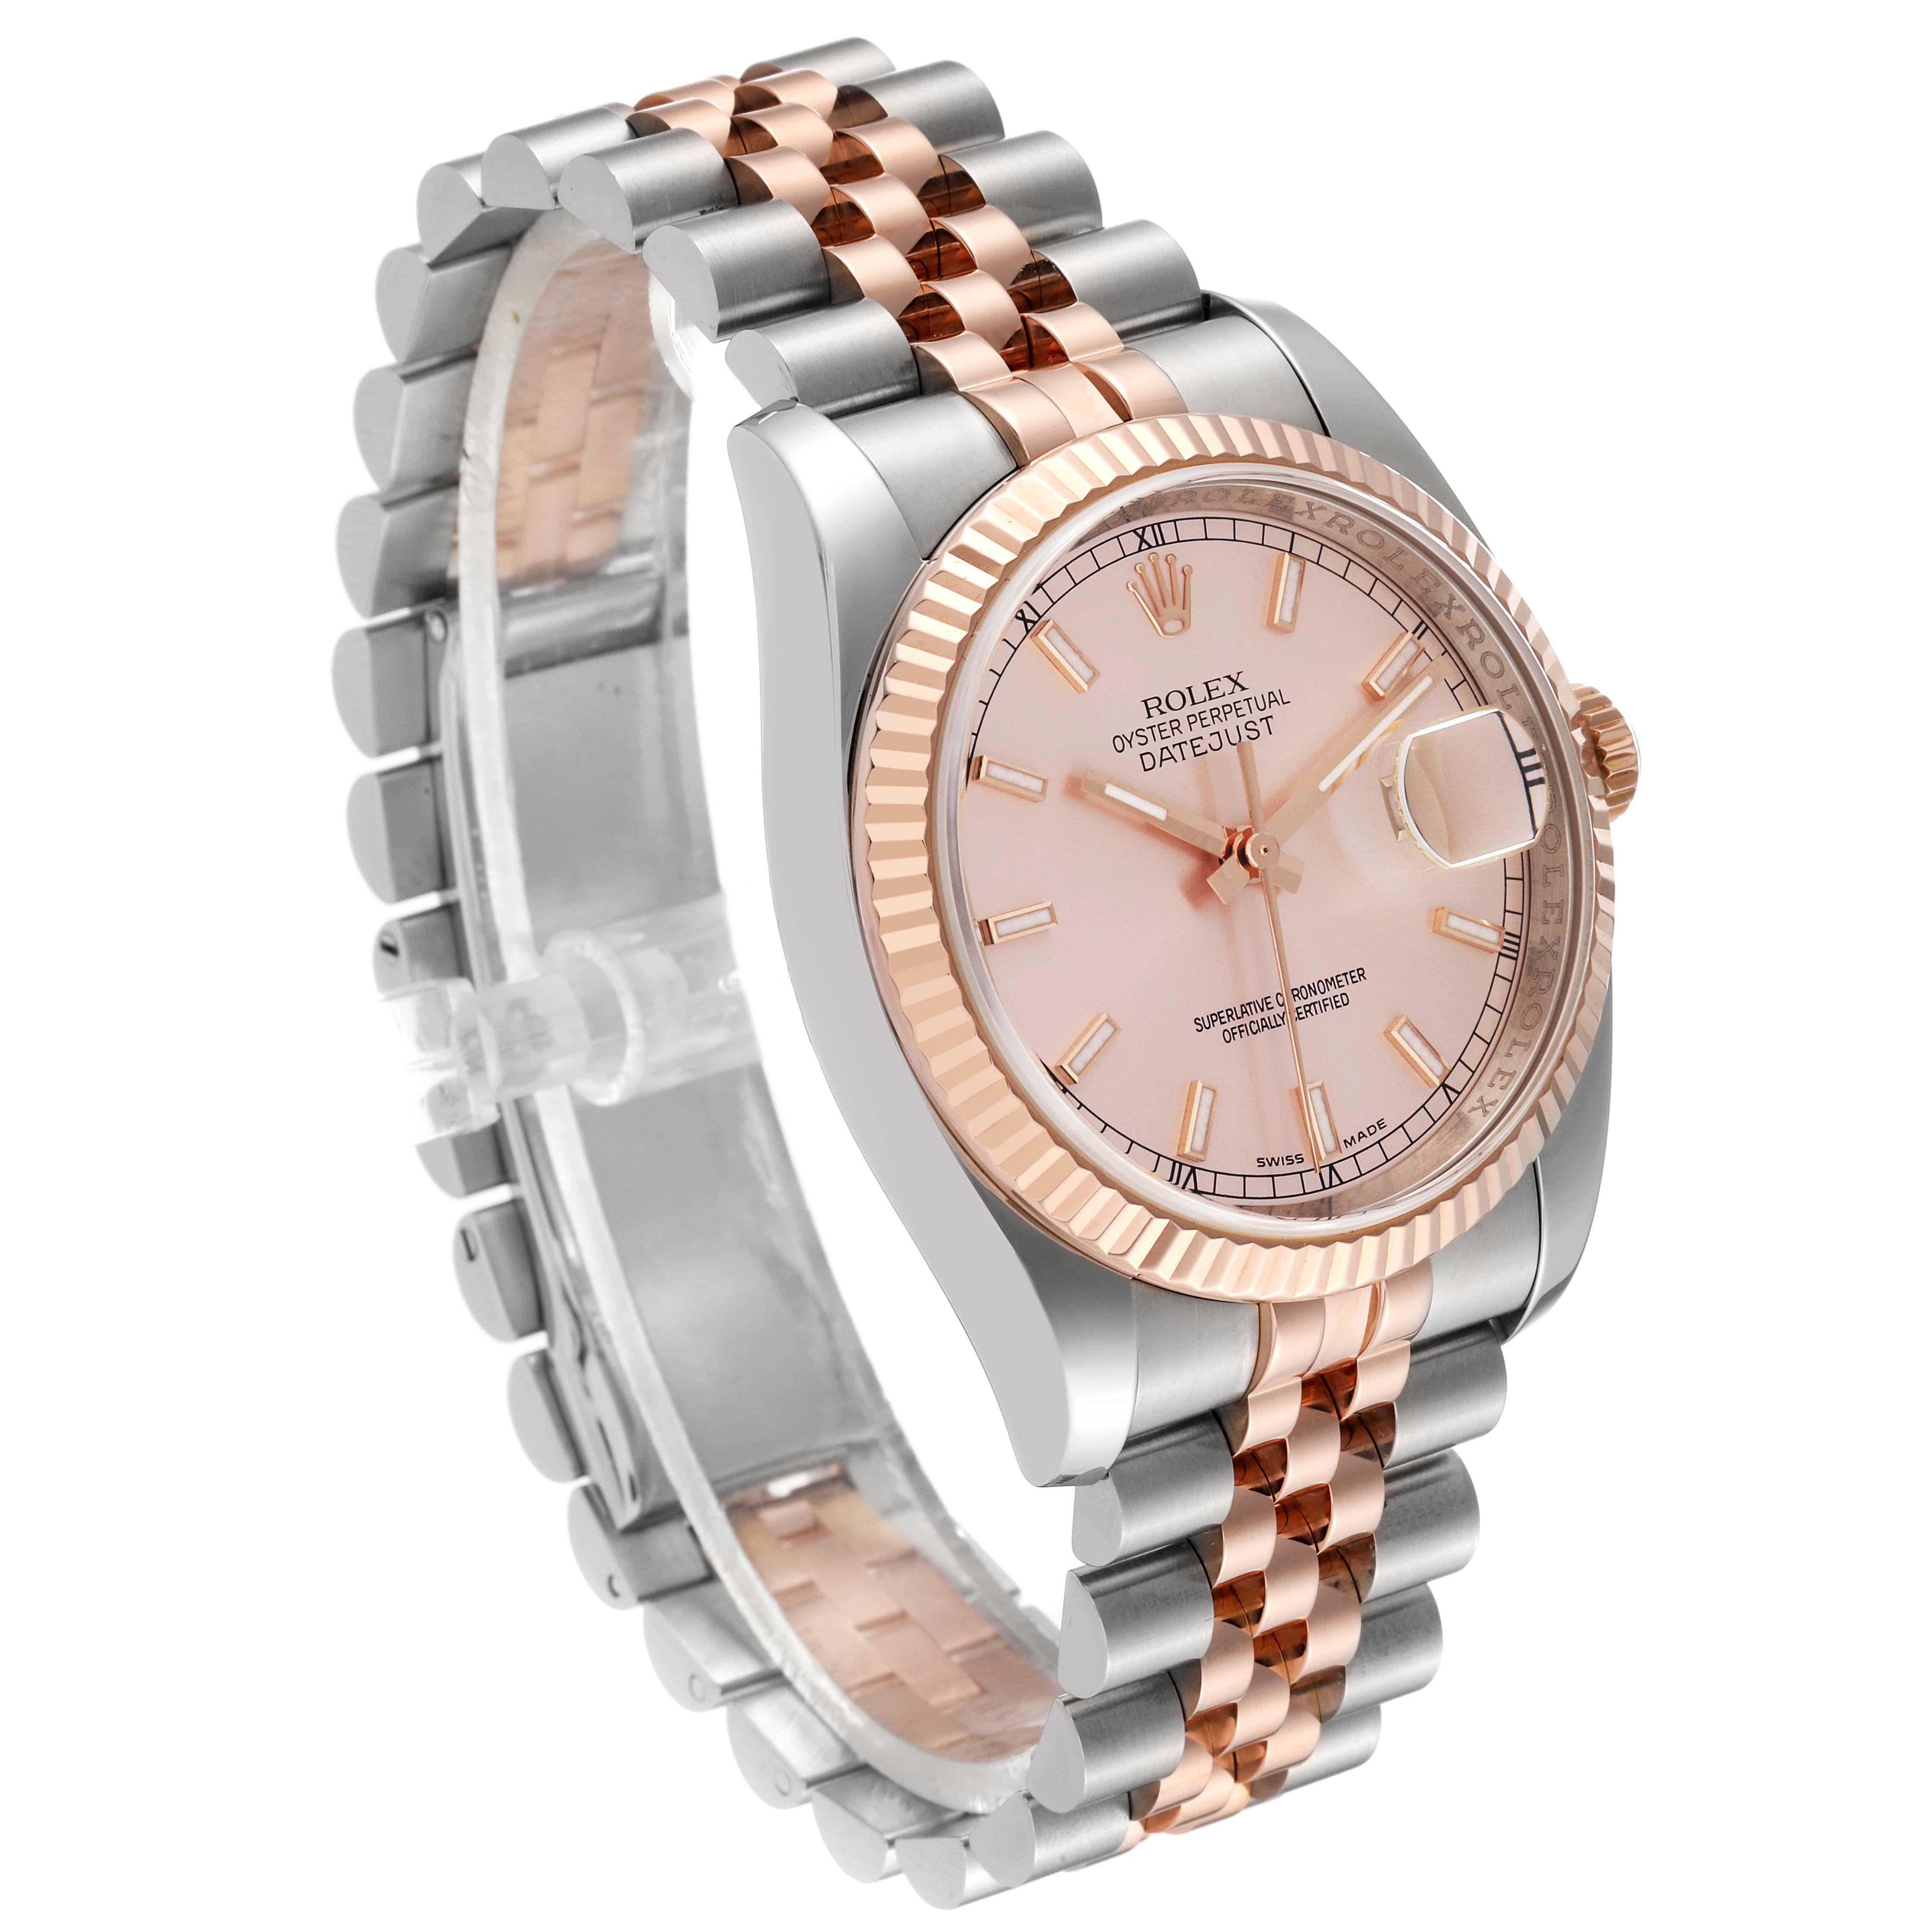 Rolex Datejust Steel Rose Gold Pink Dial Mens Watch 116231 Box Papers en vente 8